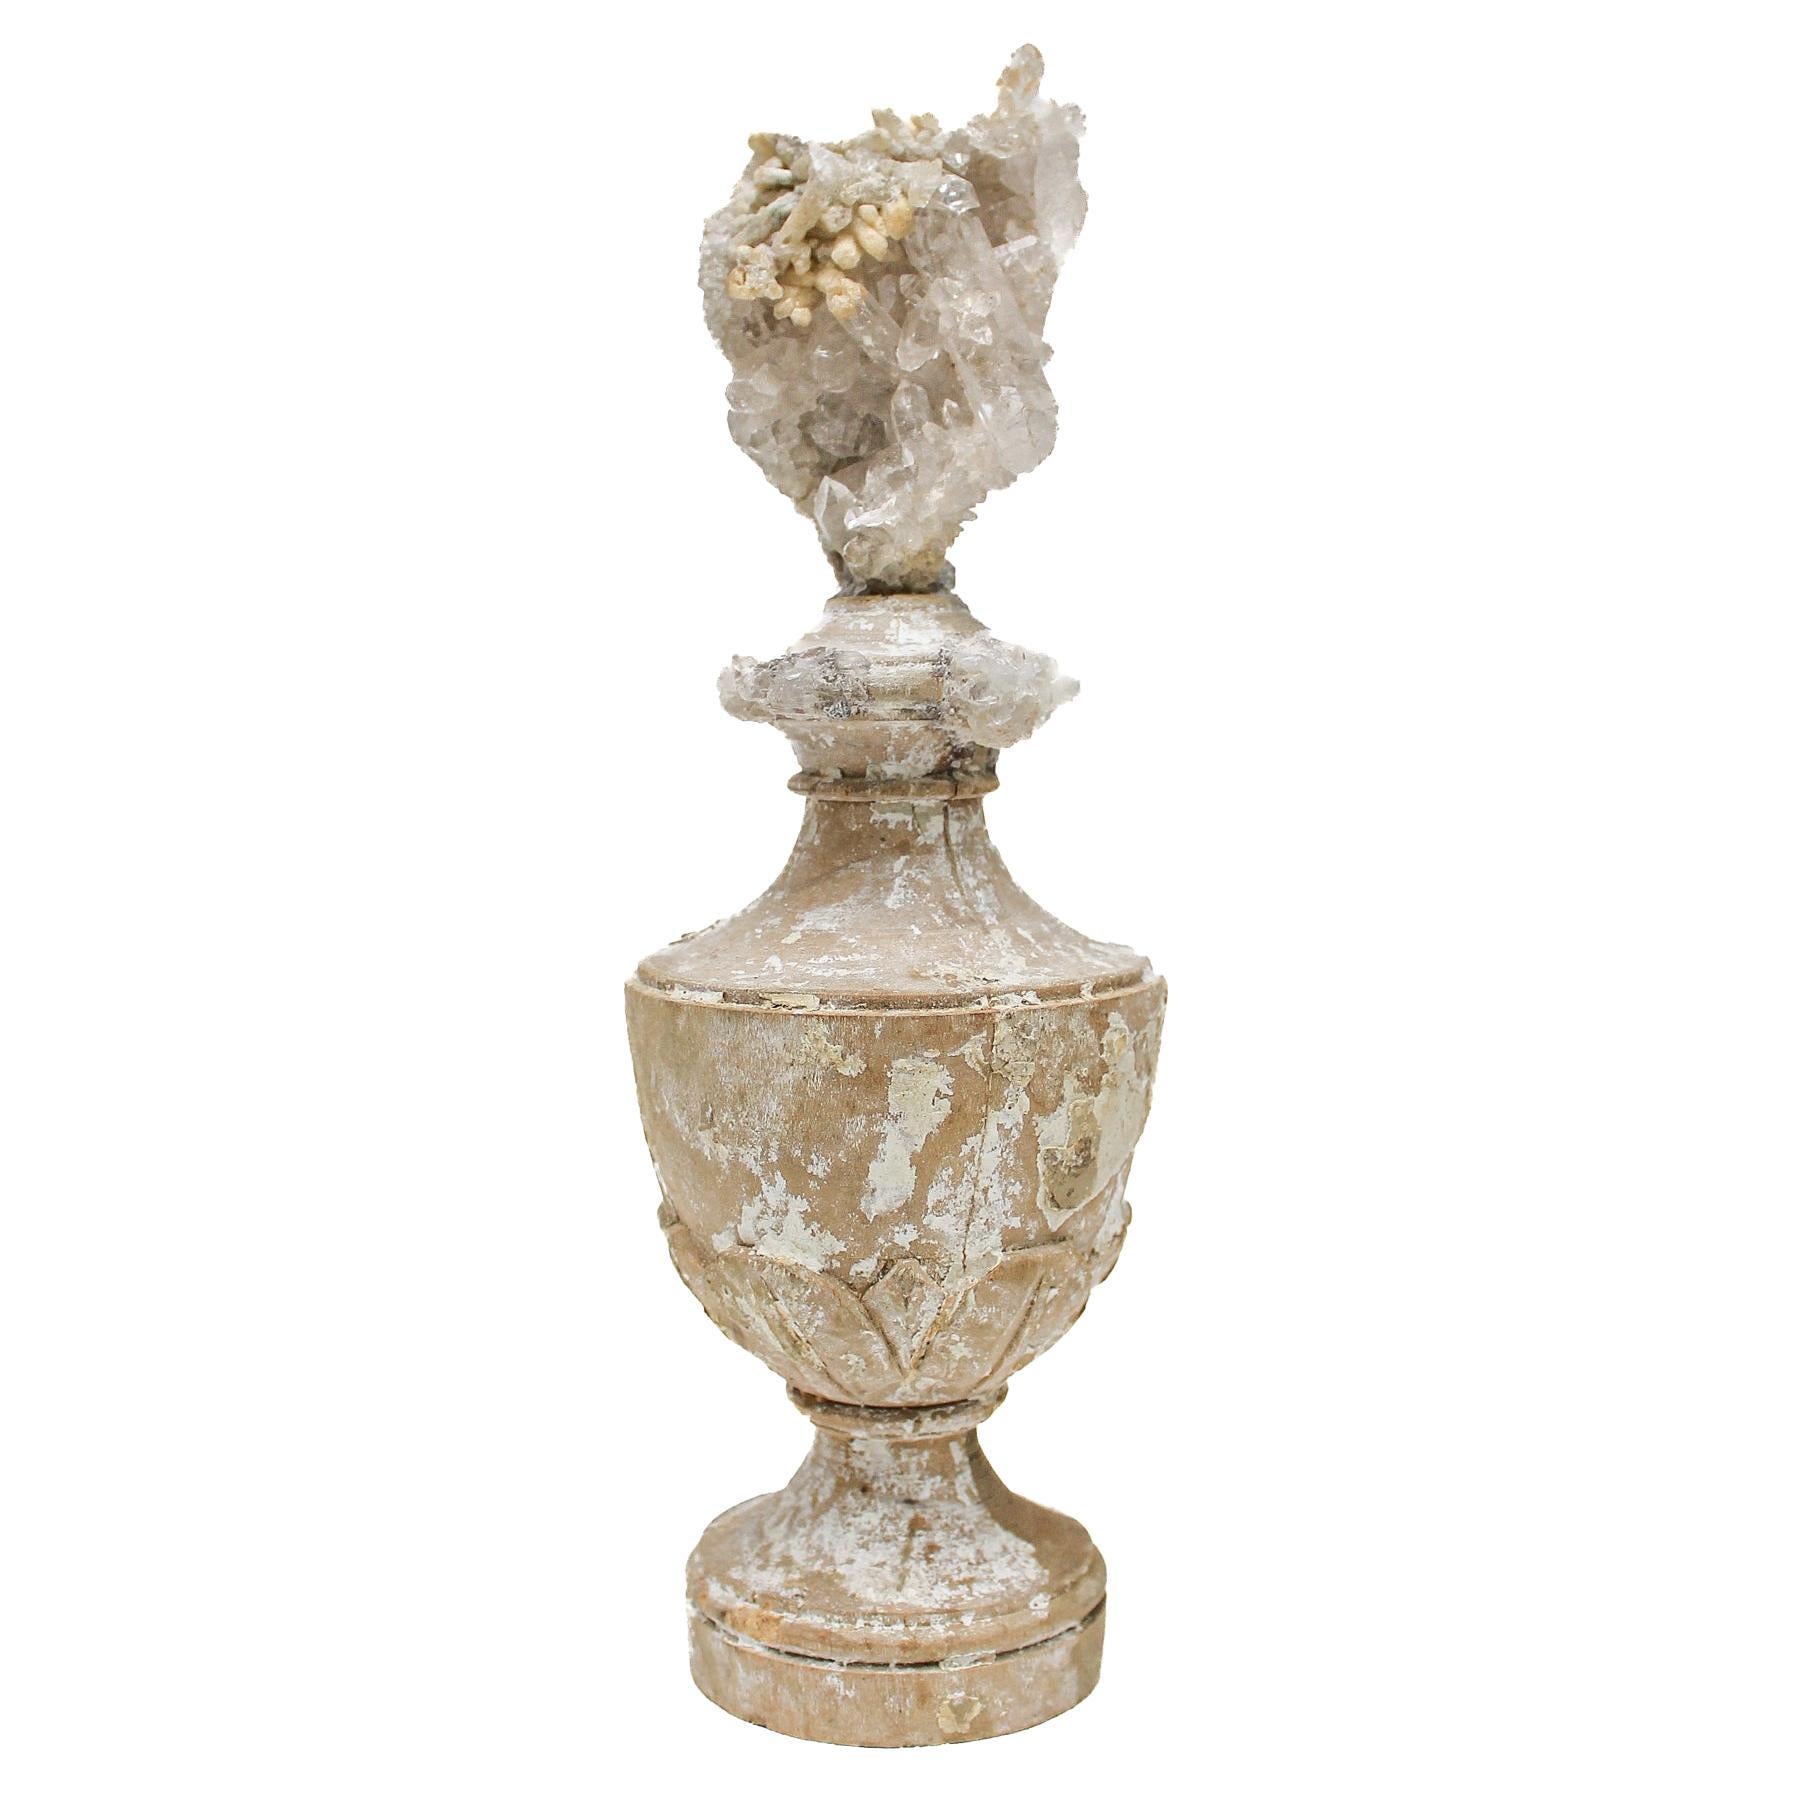 17th Century Italian Vase with a Crystal Quartz Cluster with Calcite